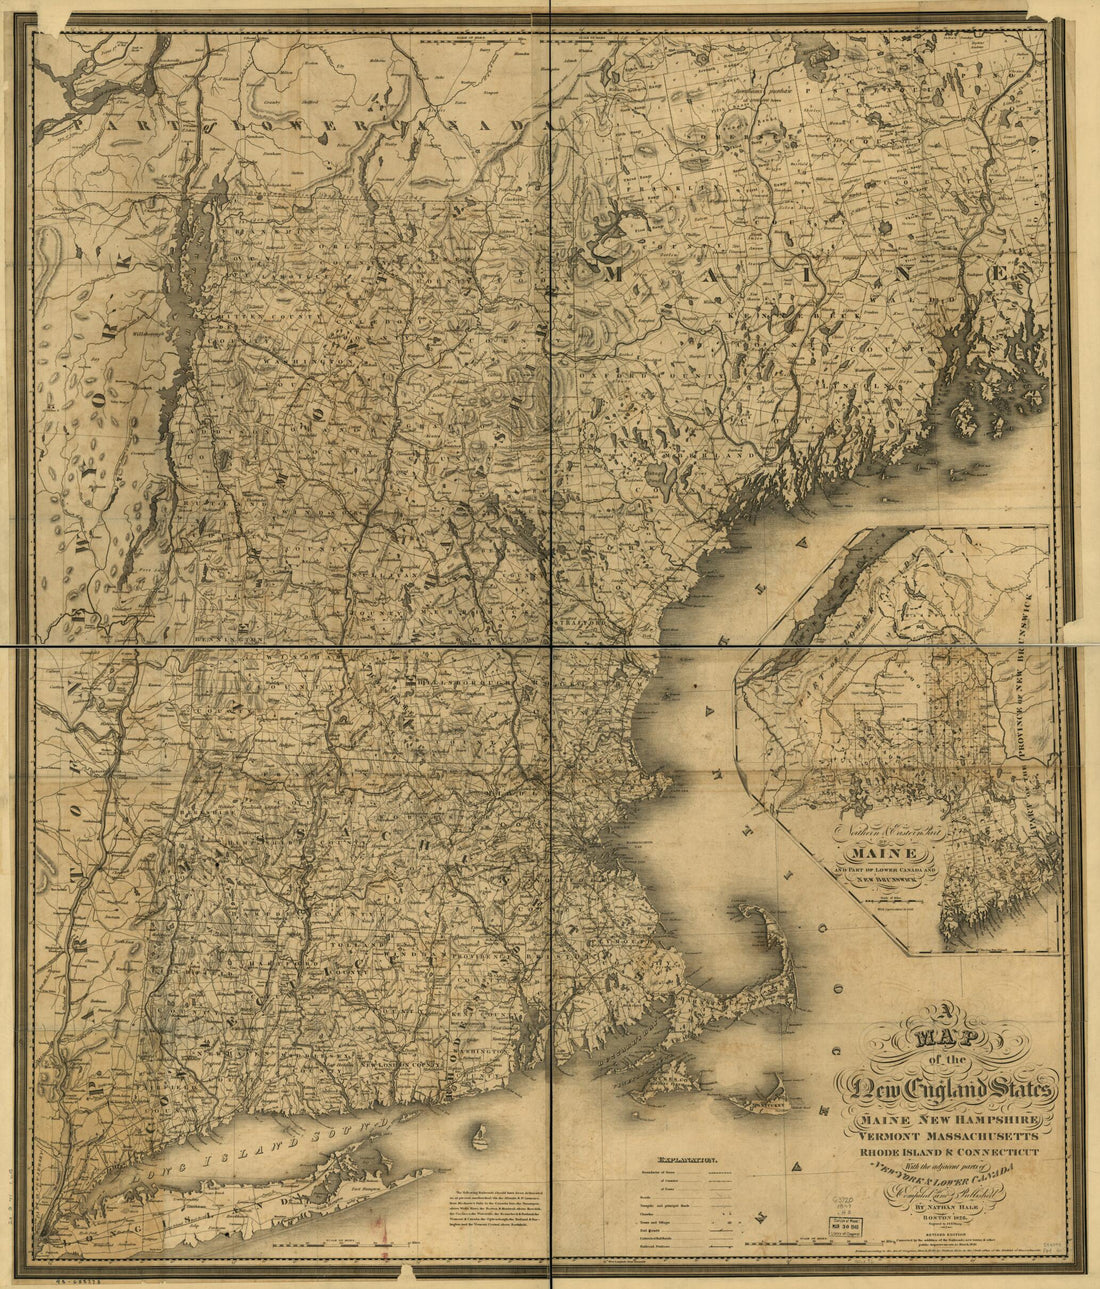 This old map of A Map of the New England States, Maine, New Hampshire, Vermont, Massachusetts, Rhode Island &amp; Connecticut With the Adjacent Parts of New York &amp; Lower Canada; Compiled and Published by Nathan Hale, Boston, 1826 from 1849 was created by Nat